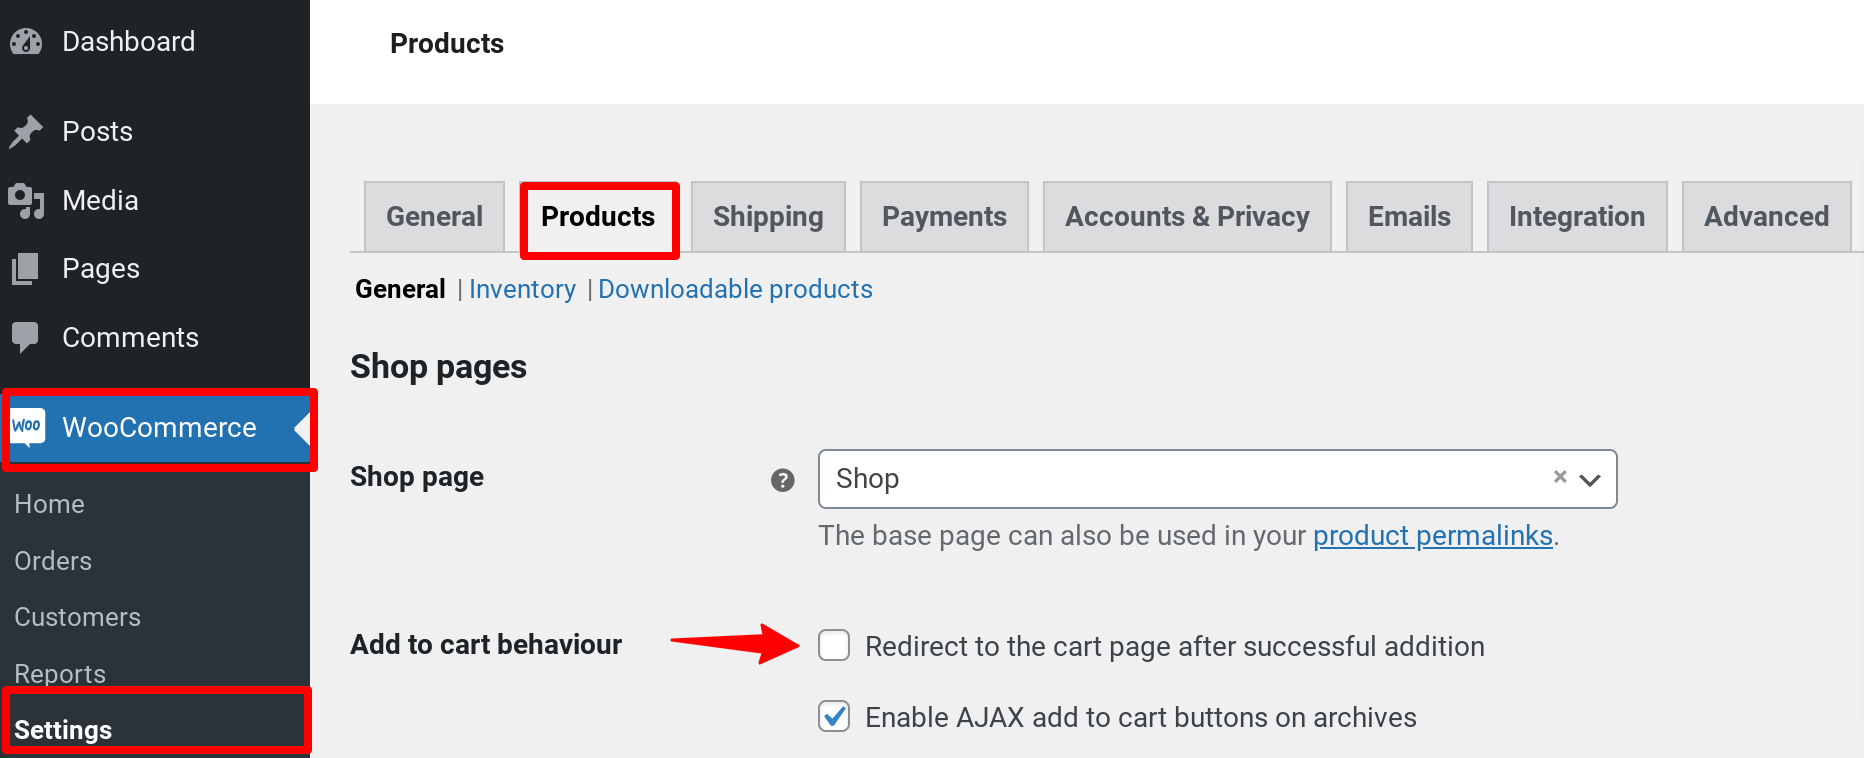 Redirect to the cart page after product addition